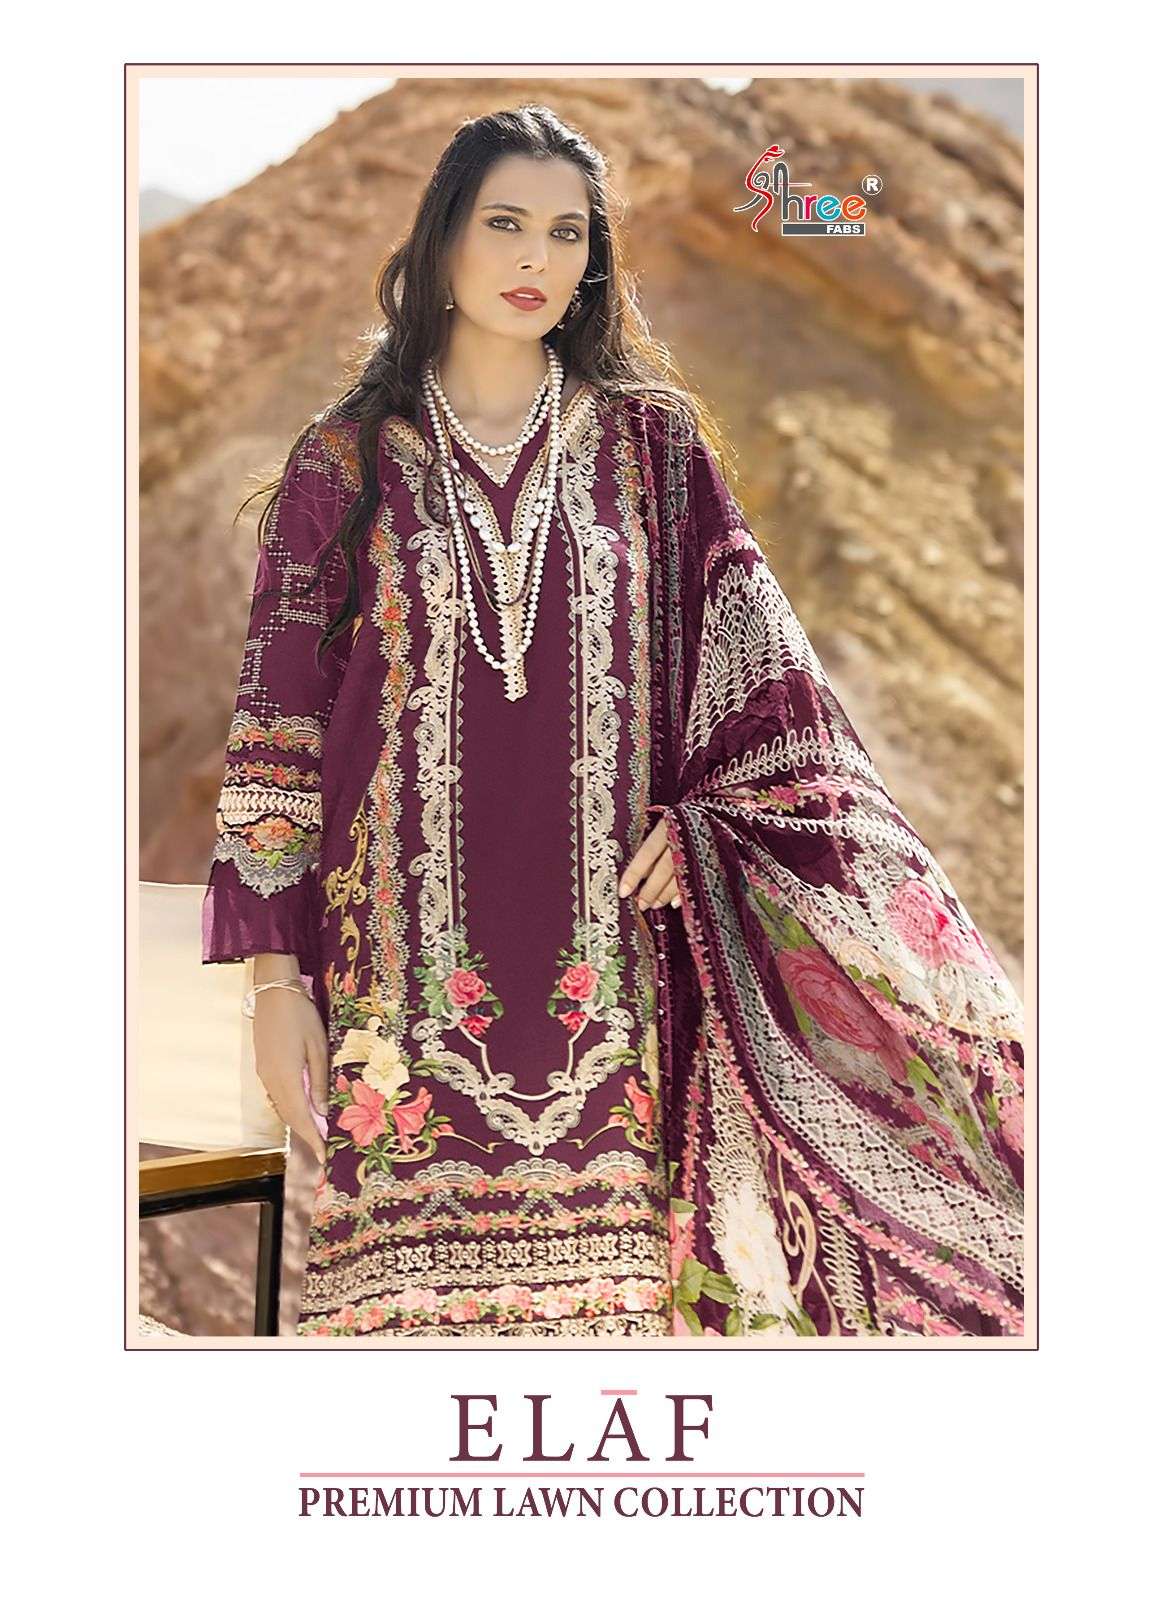 SHREE FABS ELAF PREMIUM LAWN COLLECTION 